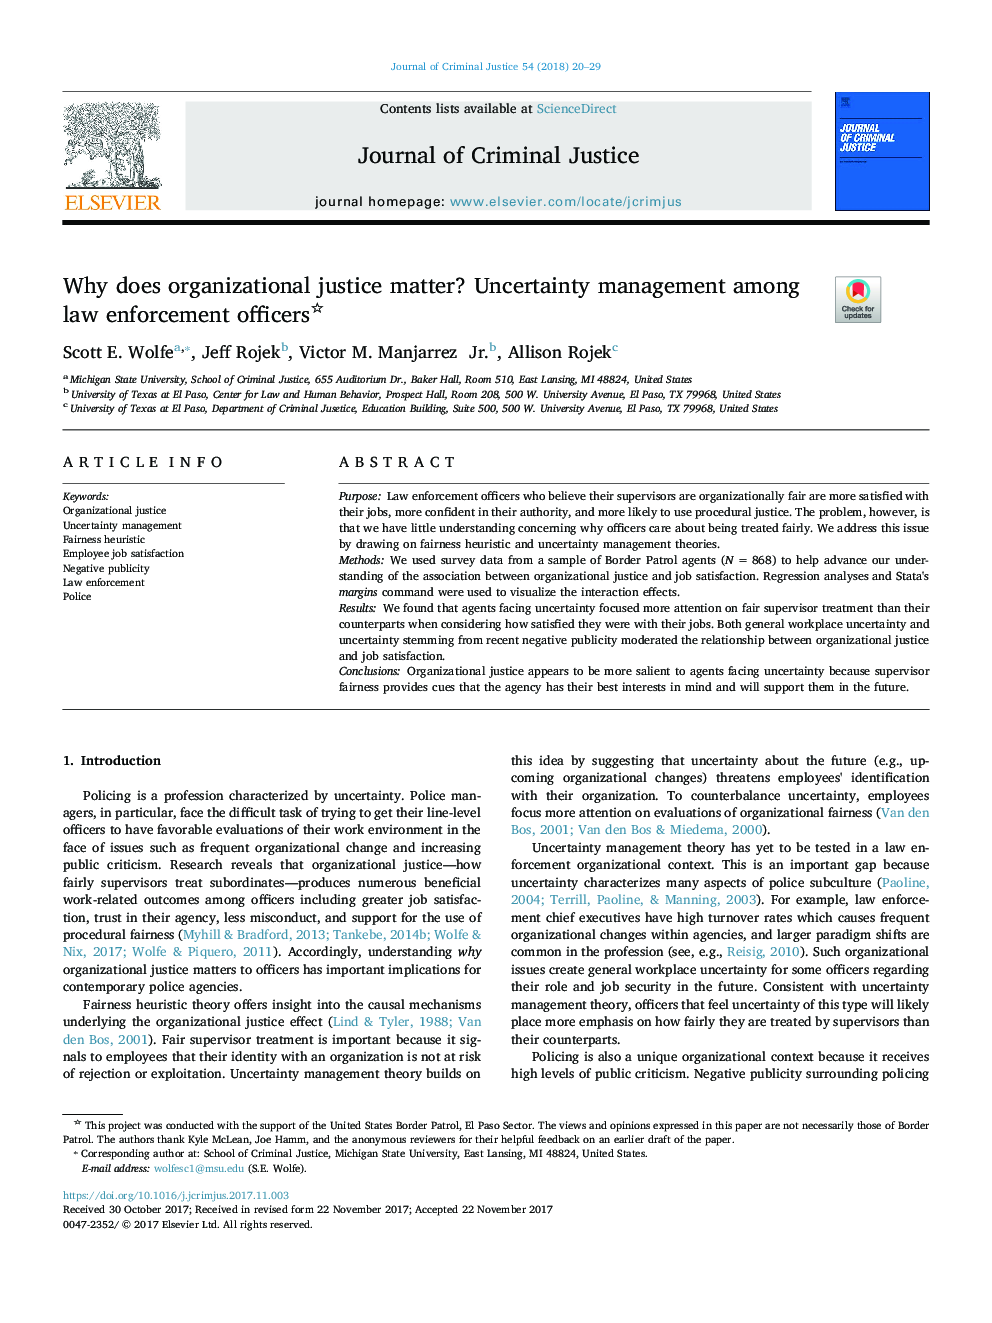 Why does organizational justice matter? Uncertainty management among law enforcement officers